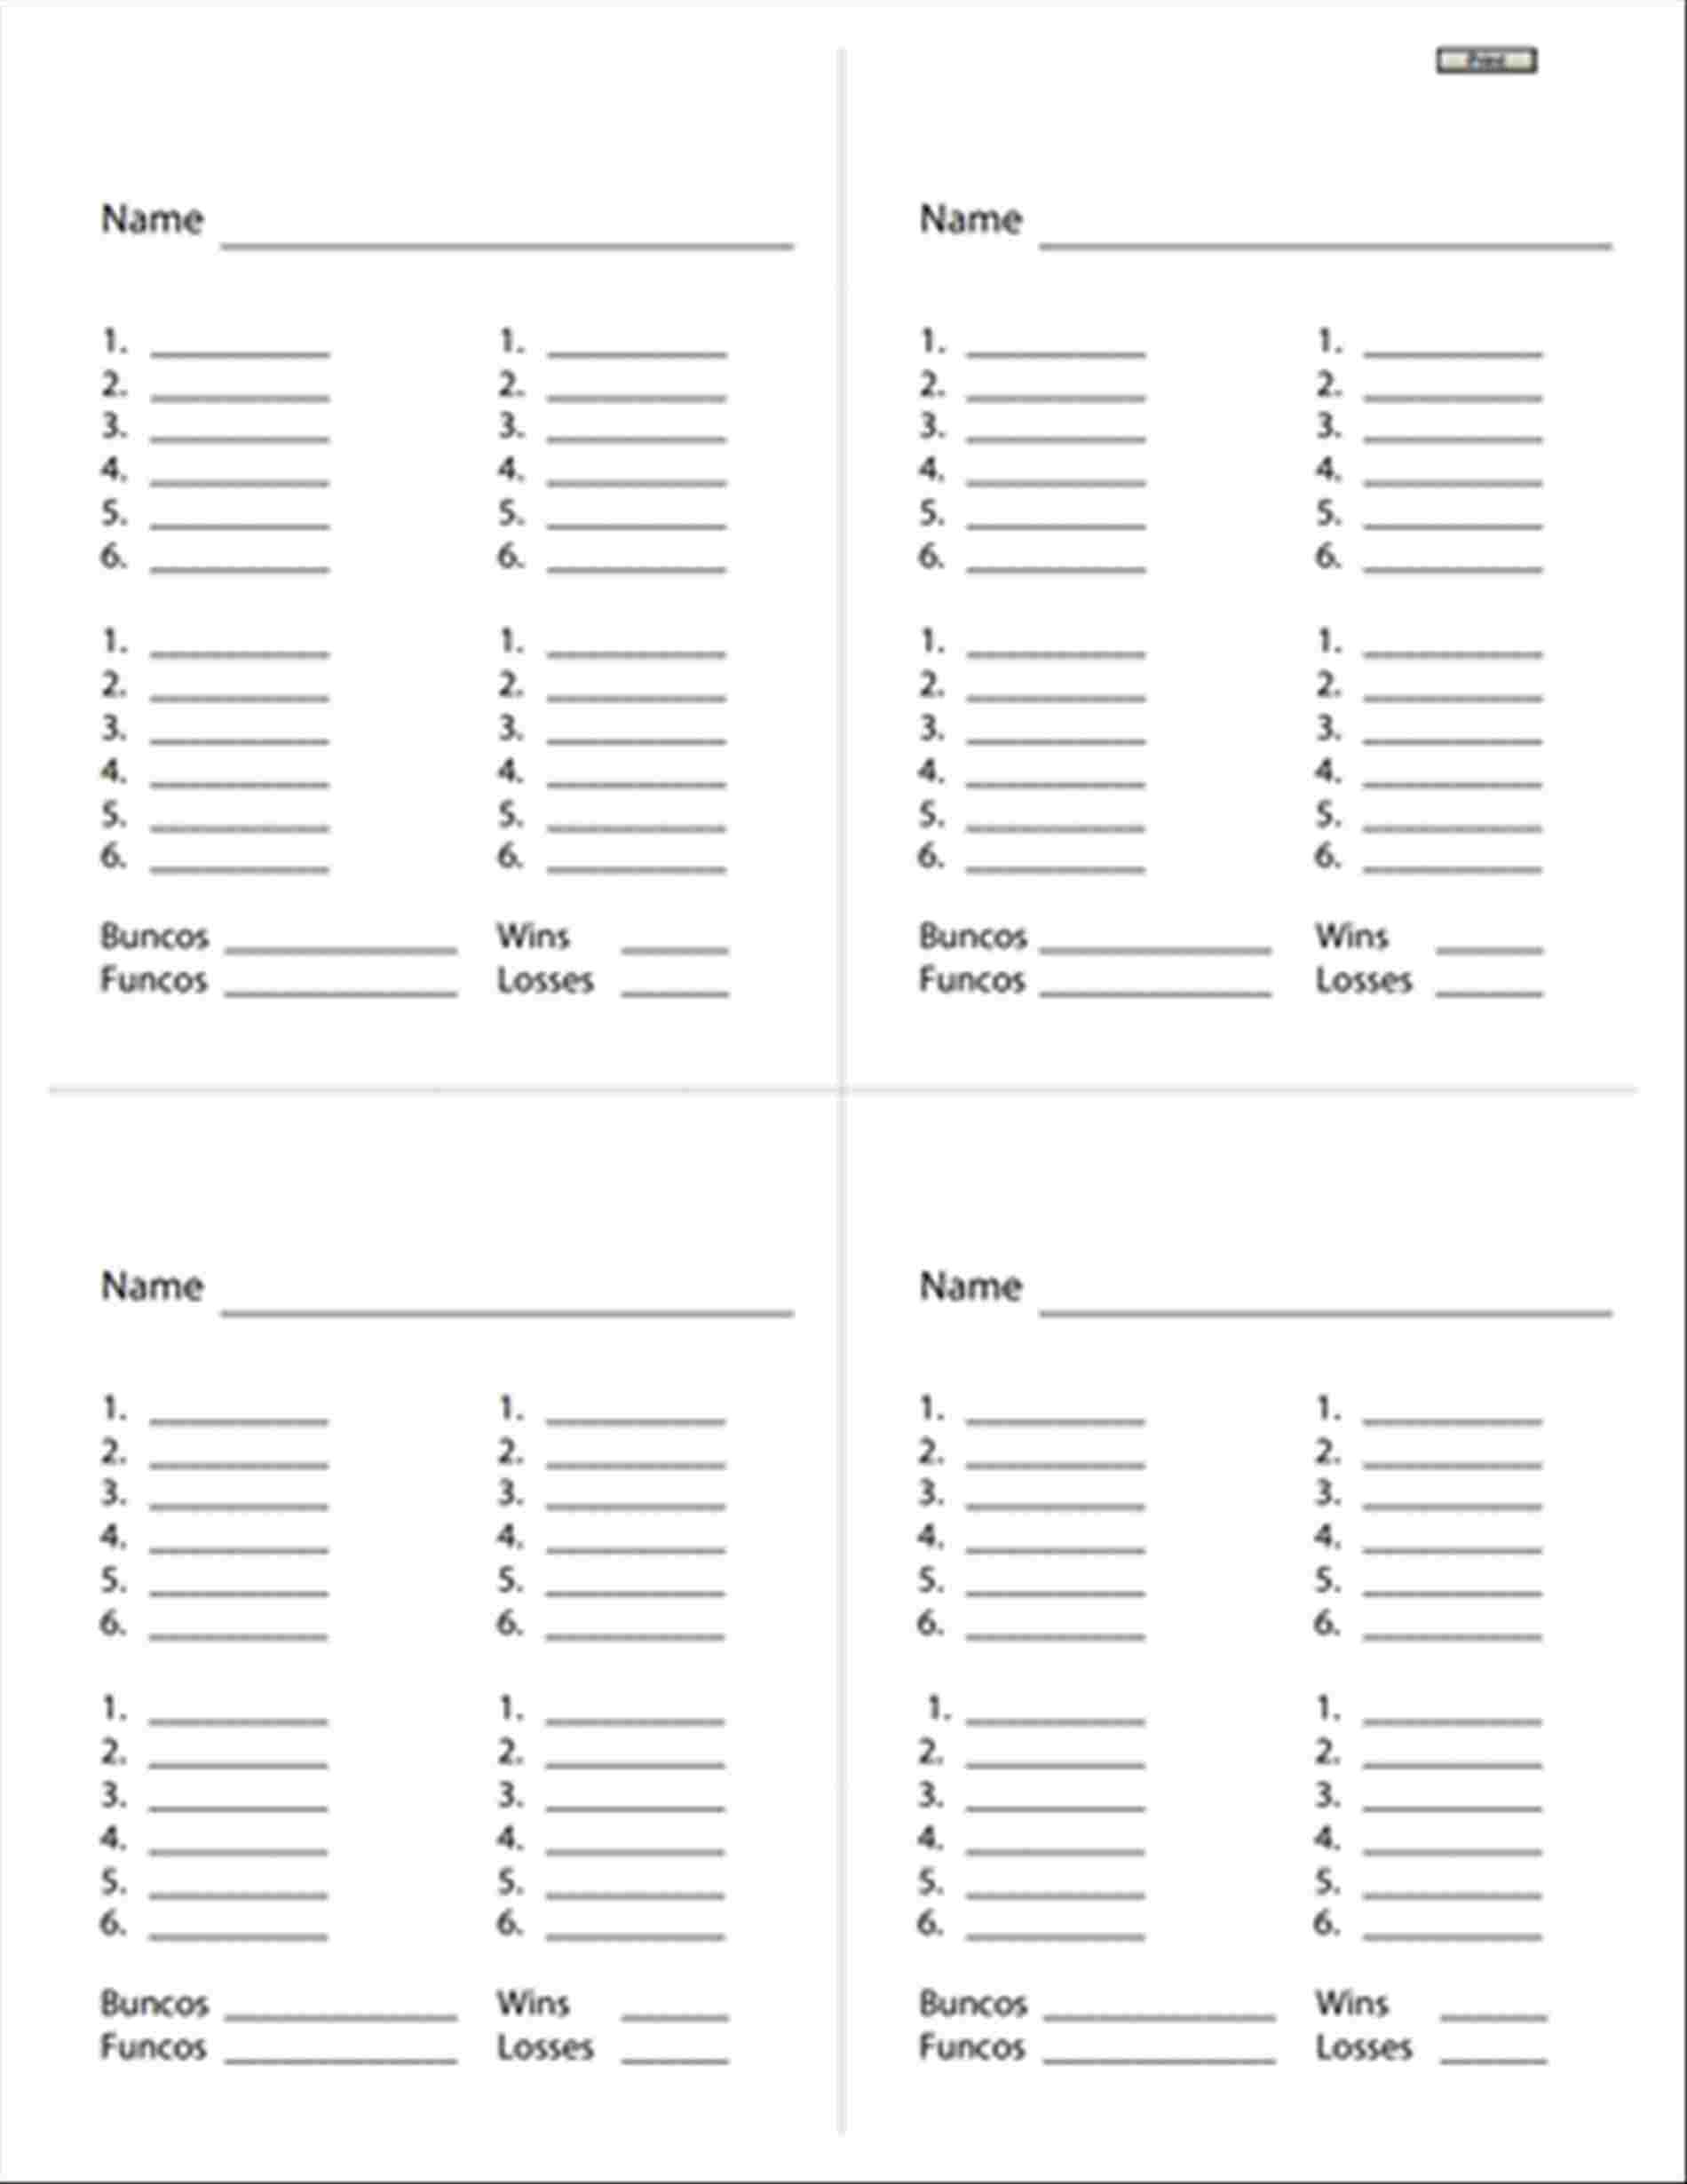 Free Printable Bunco Score Sheets (79+ Images In Collection) Page 1 - Free Printable Halloween Bunco Score Sheets